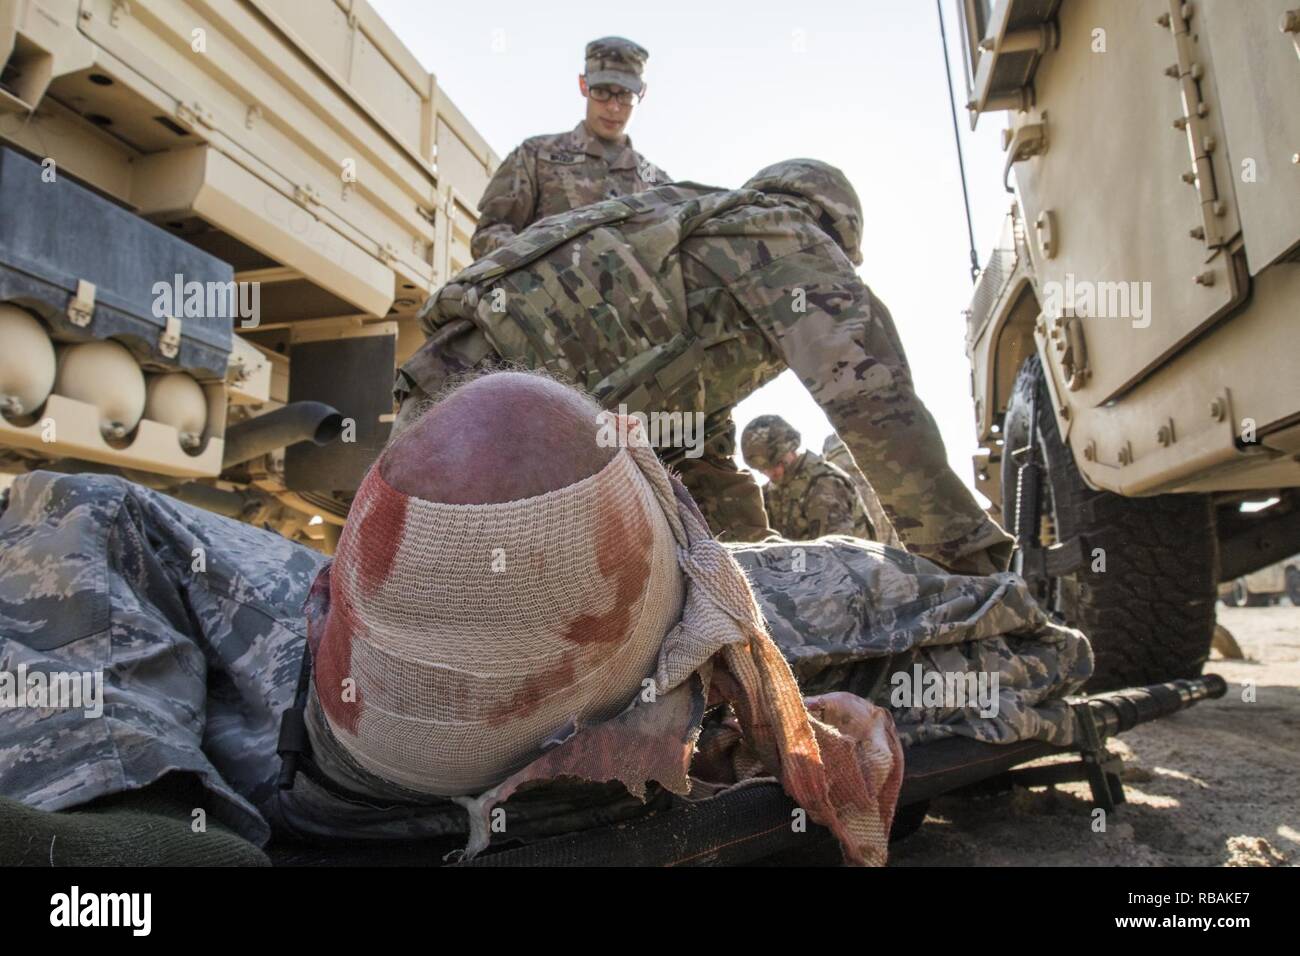 U.S. Army Sgt. Michael B. Drozd, a combat medic assigned to  the 719th Medical Detachment Veterinary Services, treats a simulated casualty during a medical training scenario, Dec. 23, 2018, Camp Arifjan, Kuwait. U.S. Army Central combat medic Soldiers conduct regular training to maintain a high level of combat readiness and proficiency. Stock Photo